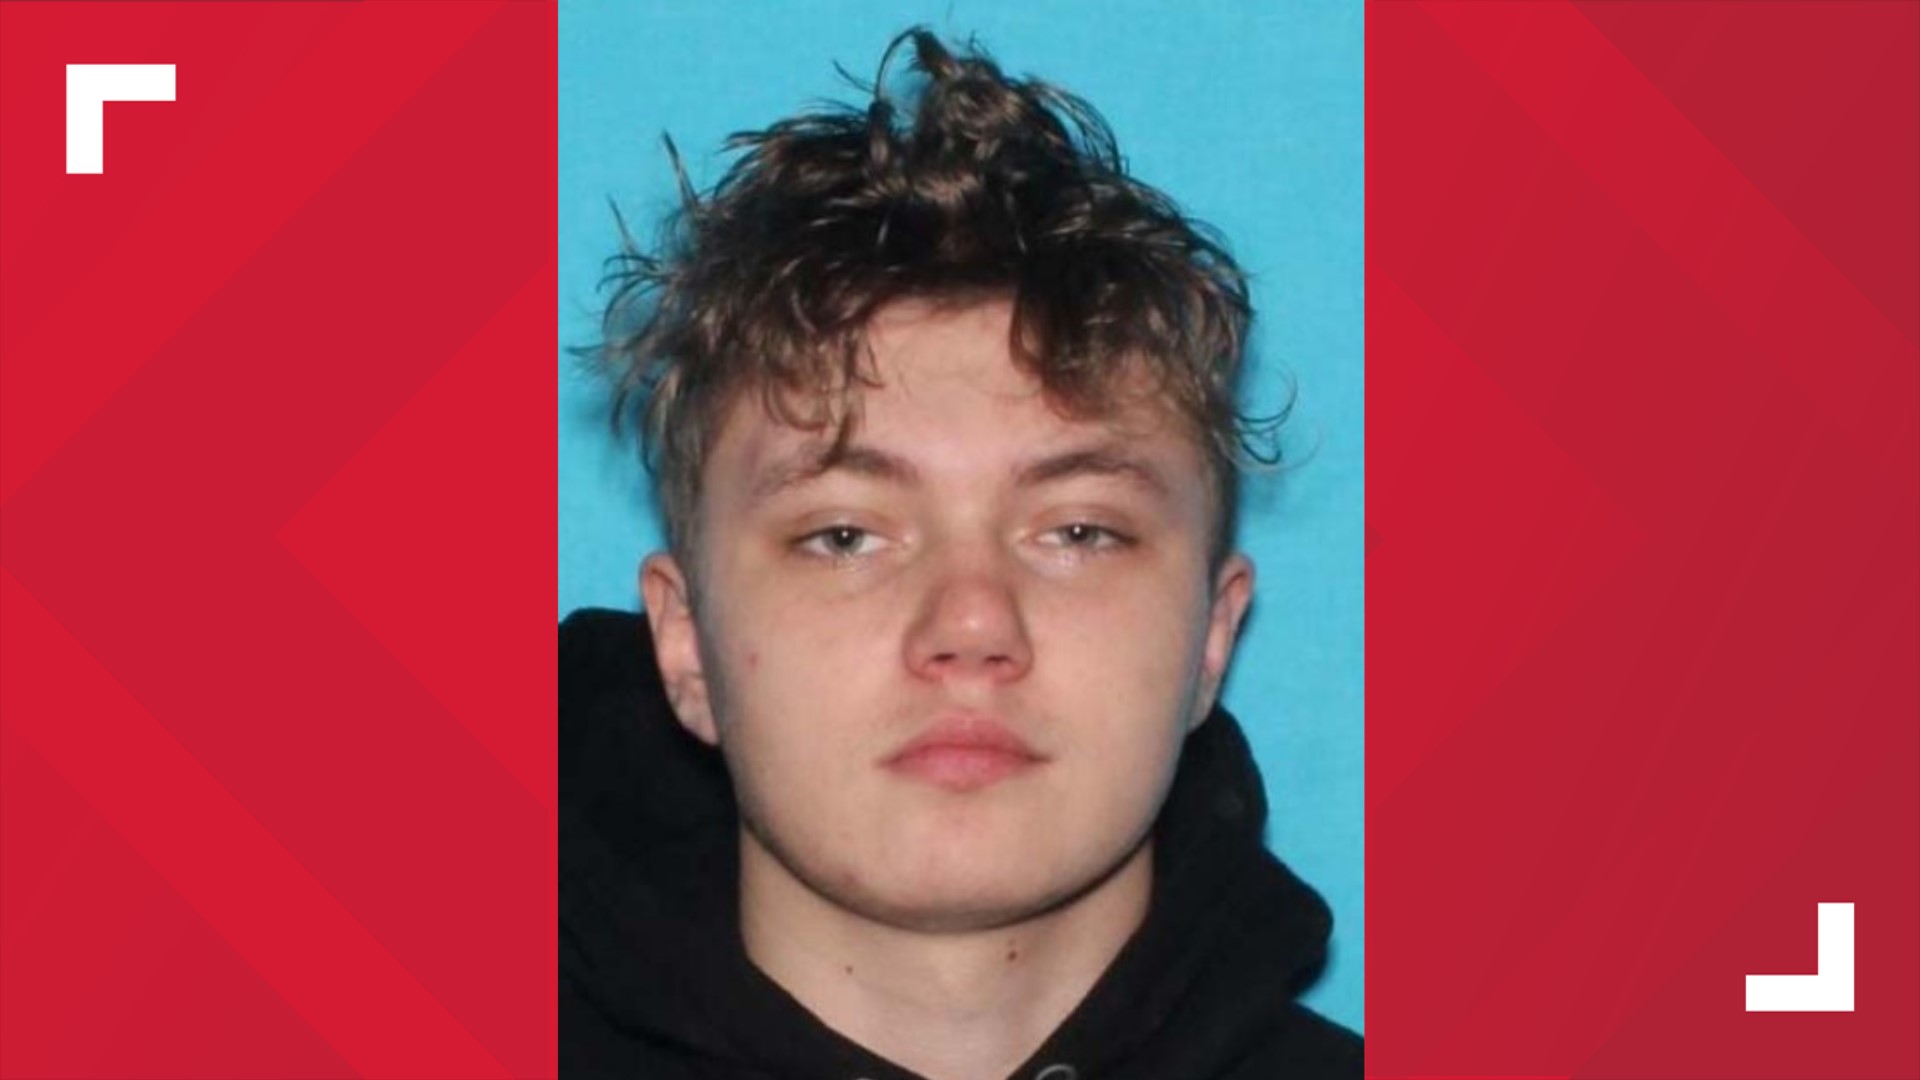 Police ask people not to approach him but to instead call local law enforcement if he is seen.